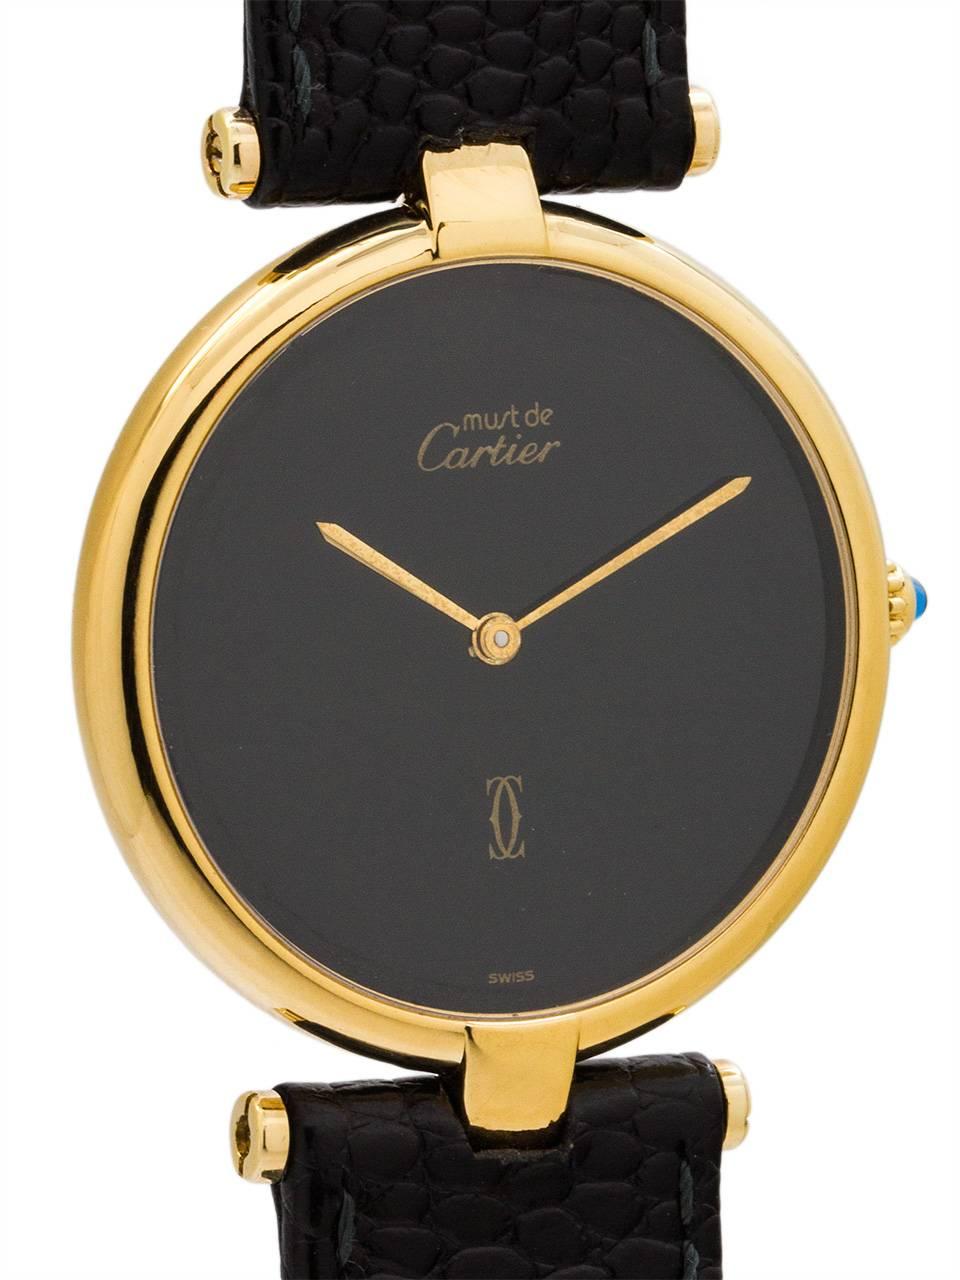 Cartier Lady’s Vermeil Vendome Tank wristwatch circa 1990s. Case measuring 30mm with t-bar lugs. Featuring a original black color dial with no hour or minute markers, and gold sword hands. Battery powered quartz movement with cabochon sapphire